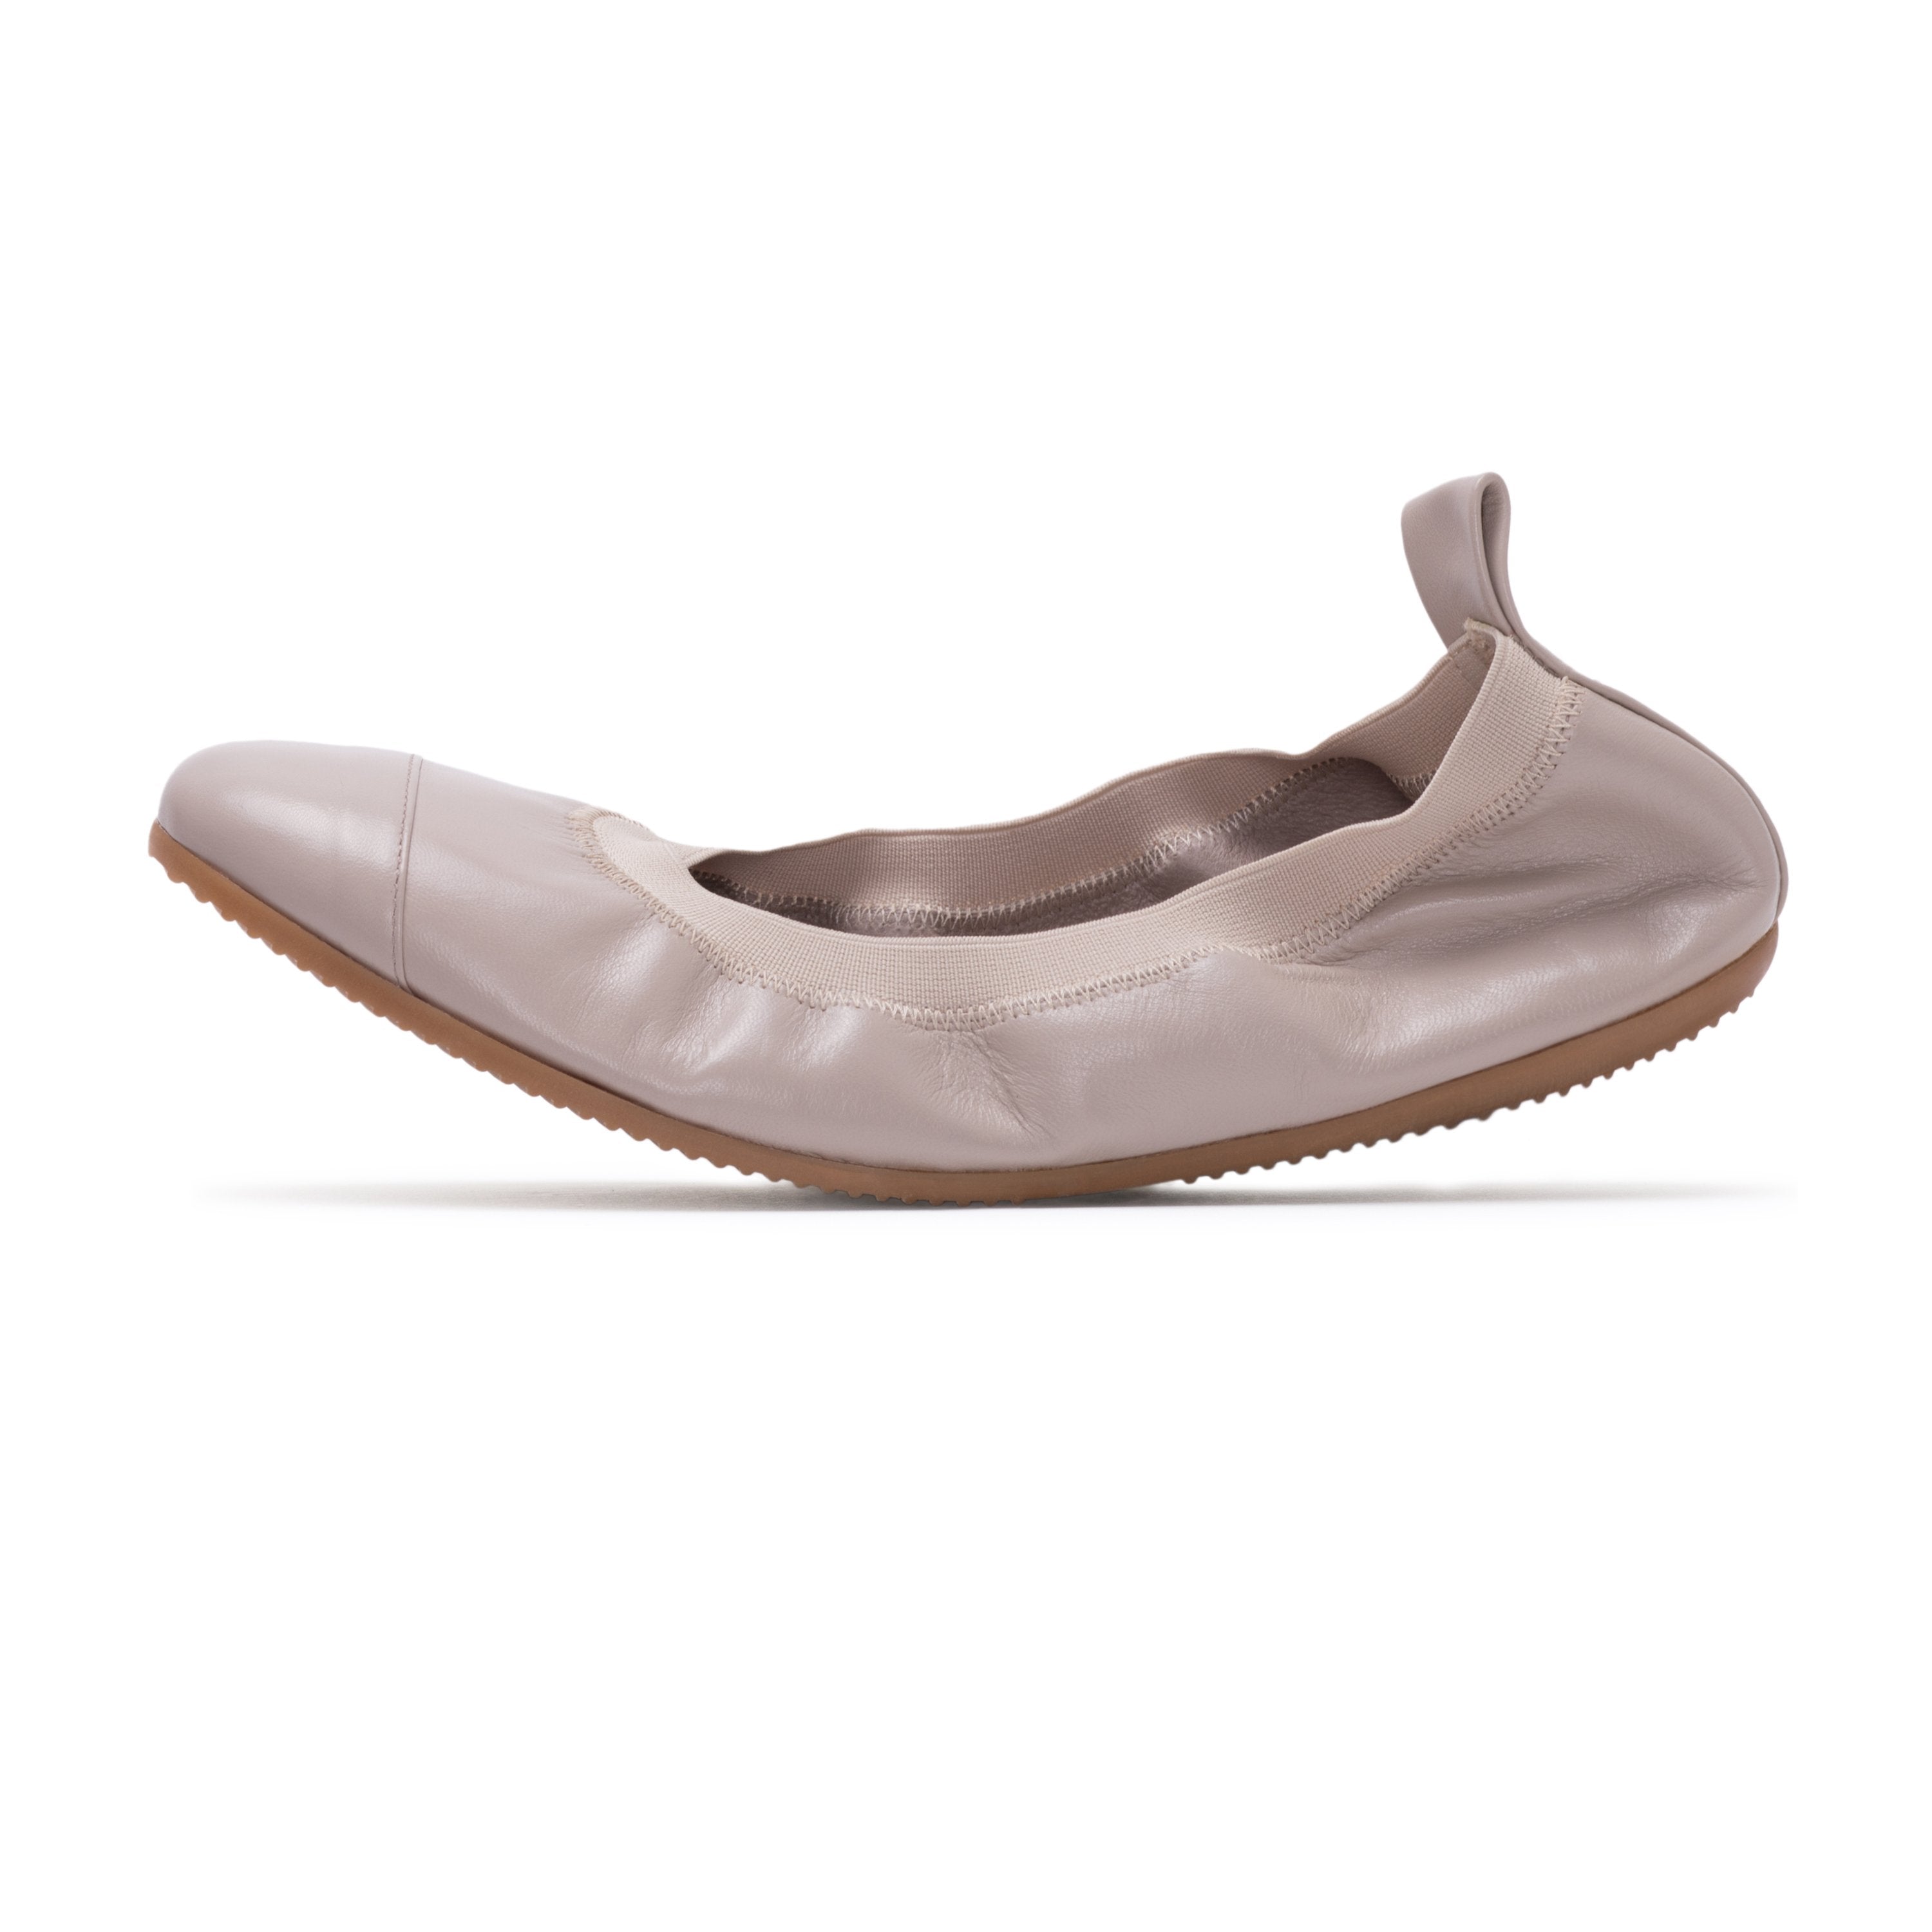 Leather Ballet Flats Hand Made Italy - Trista - Shoes